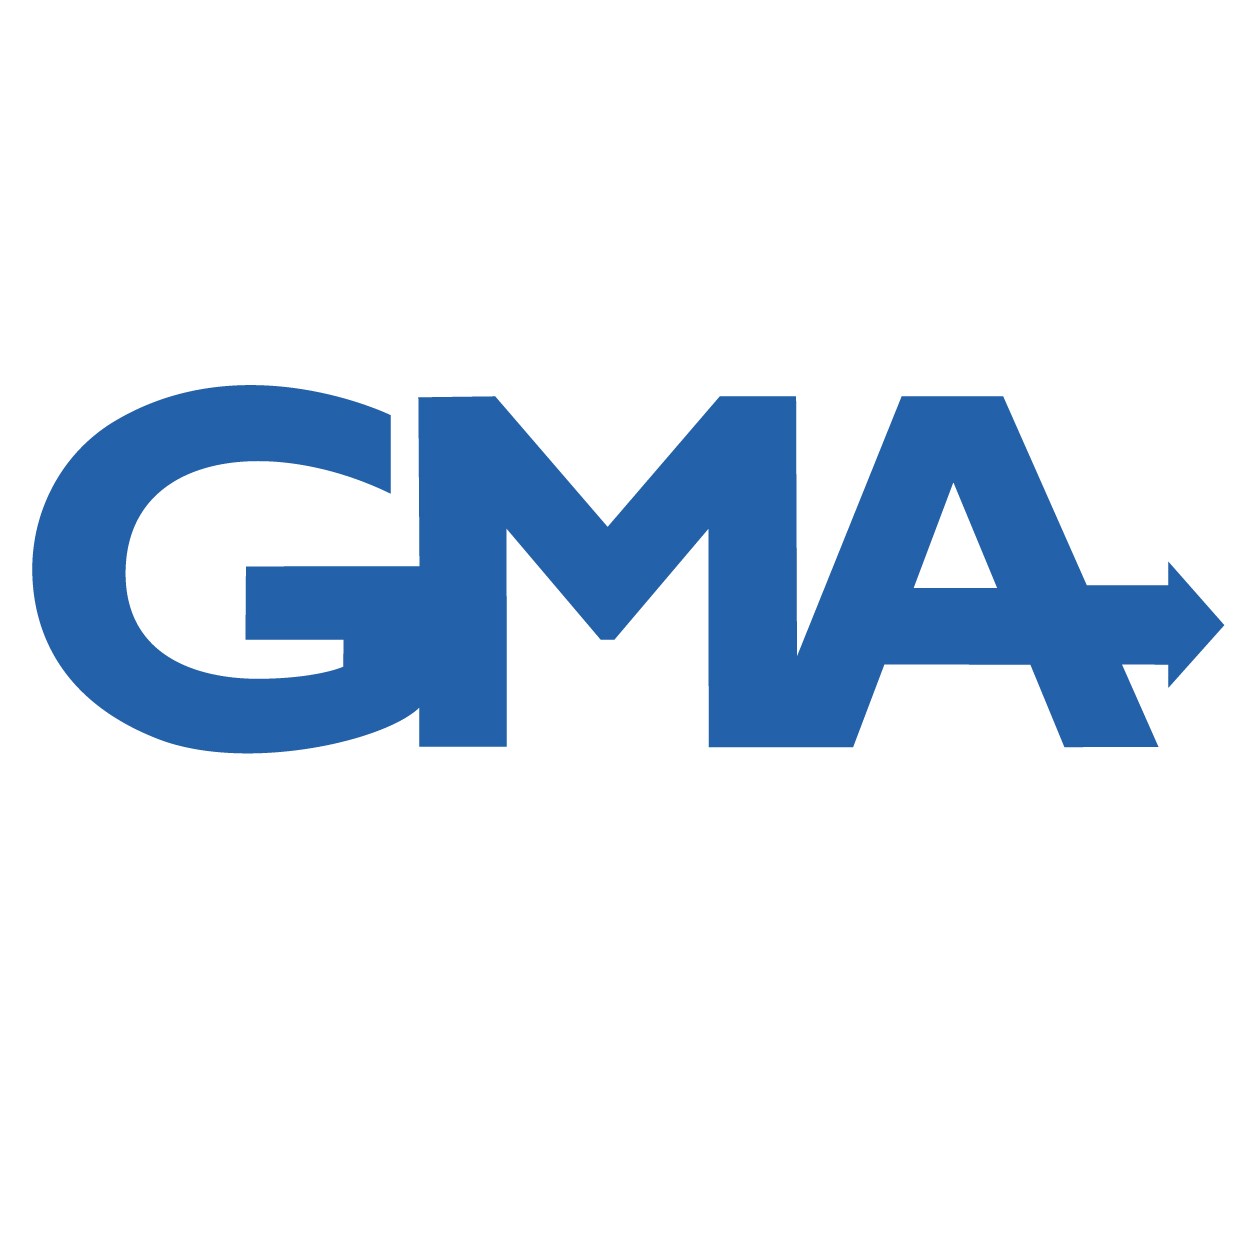 GMA Foundations Launches CEO Search